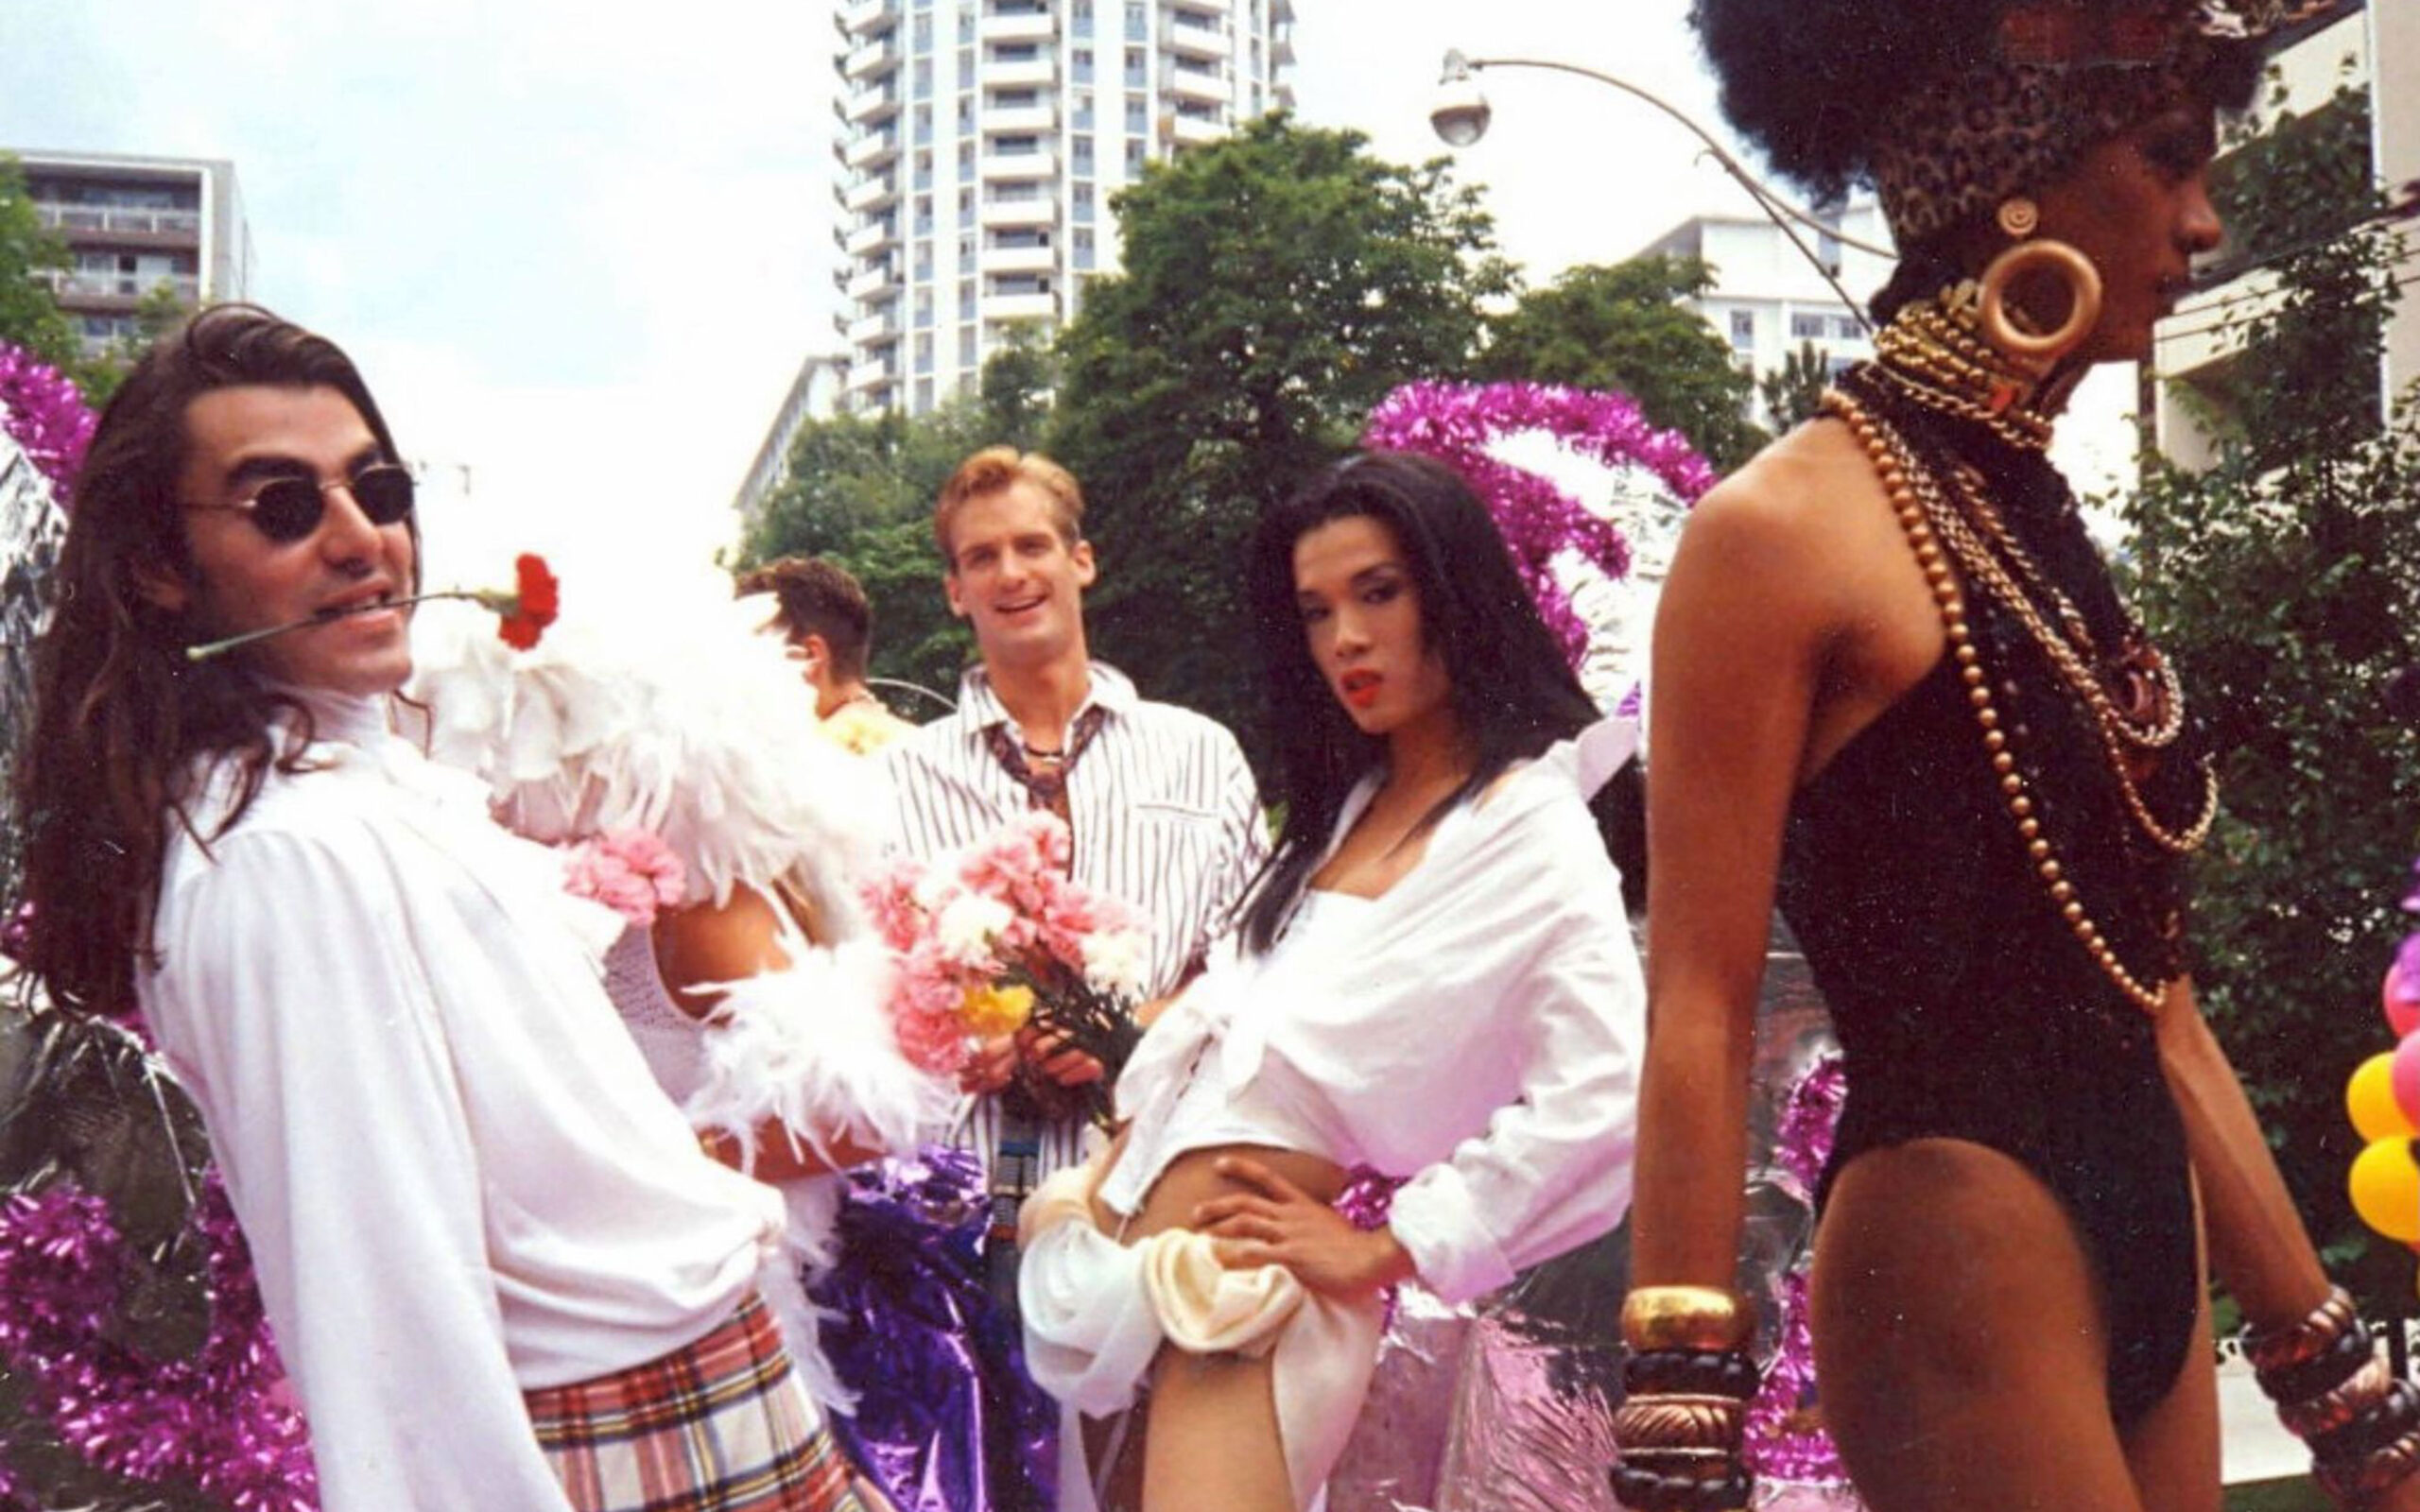 40-queer-folks-and-allies-share-their-memories-from-pride-toronto’s-first-40-years